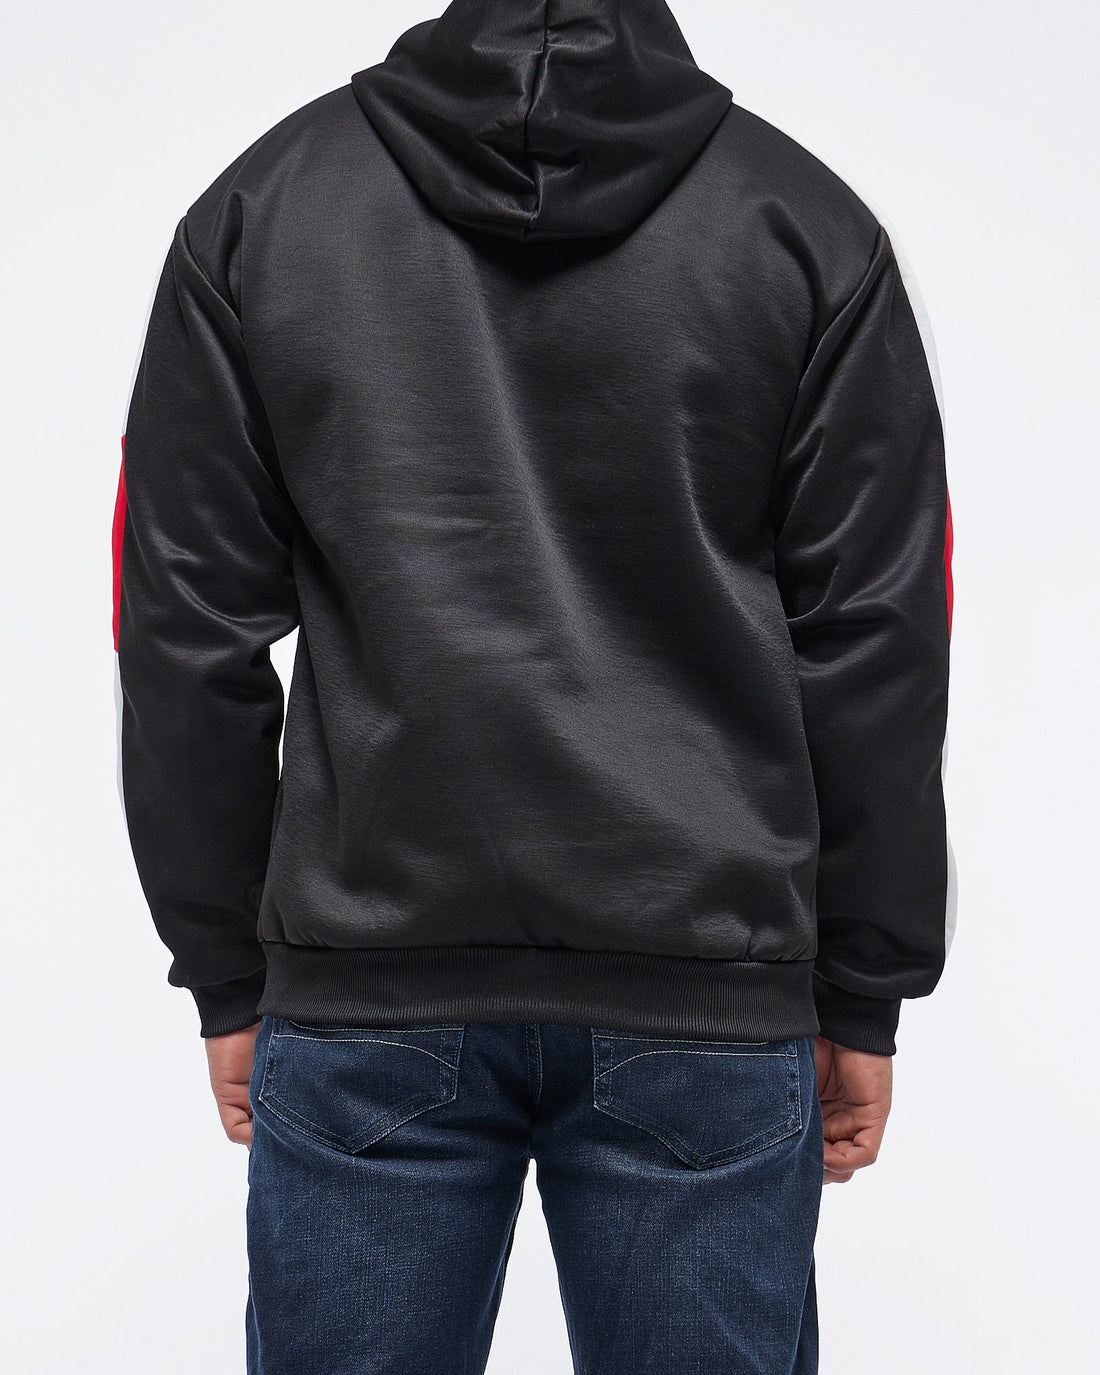 MOI OUTFIT-AD Logo Printed Men Hoodie 24.90